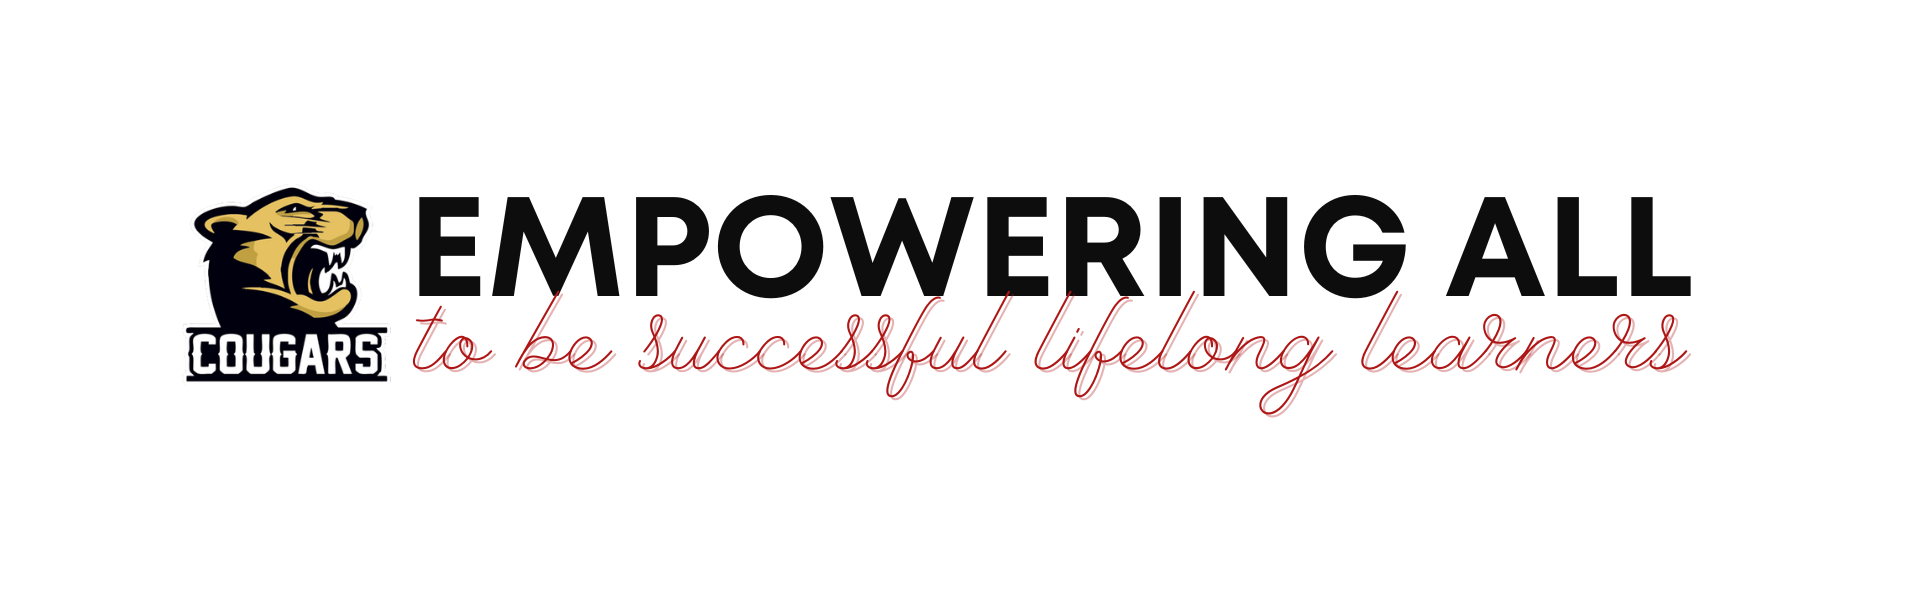 empowering all to be successful lifelong learners